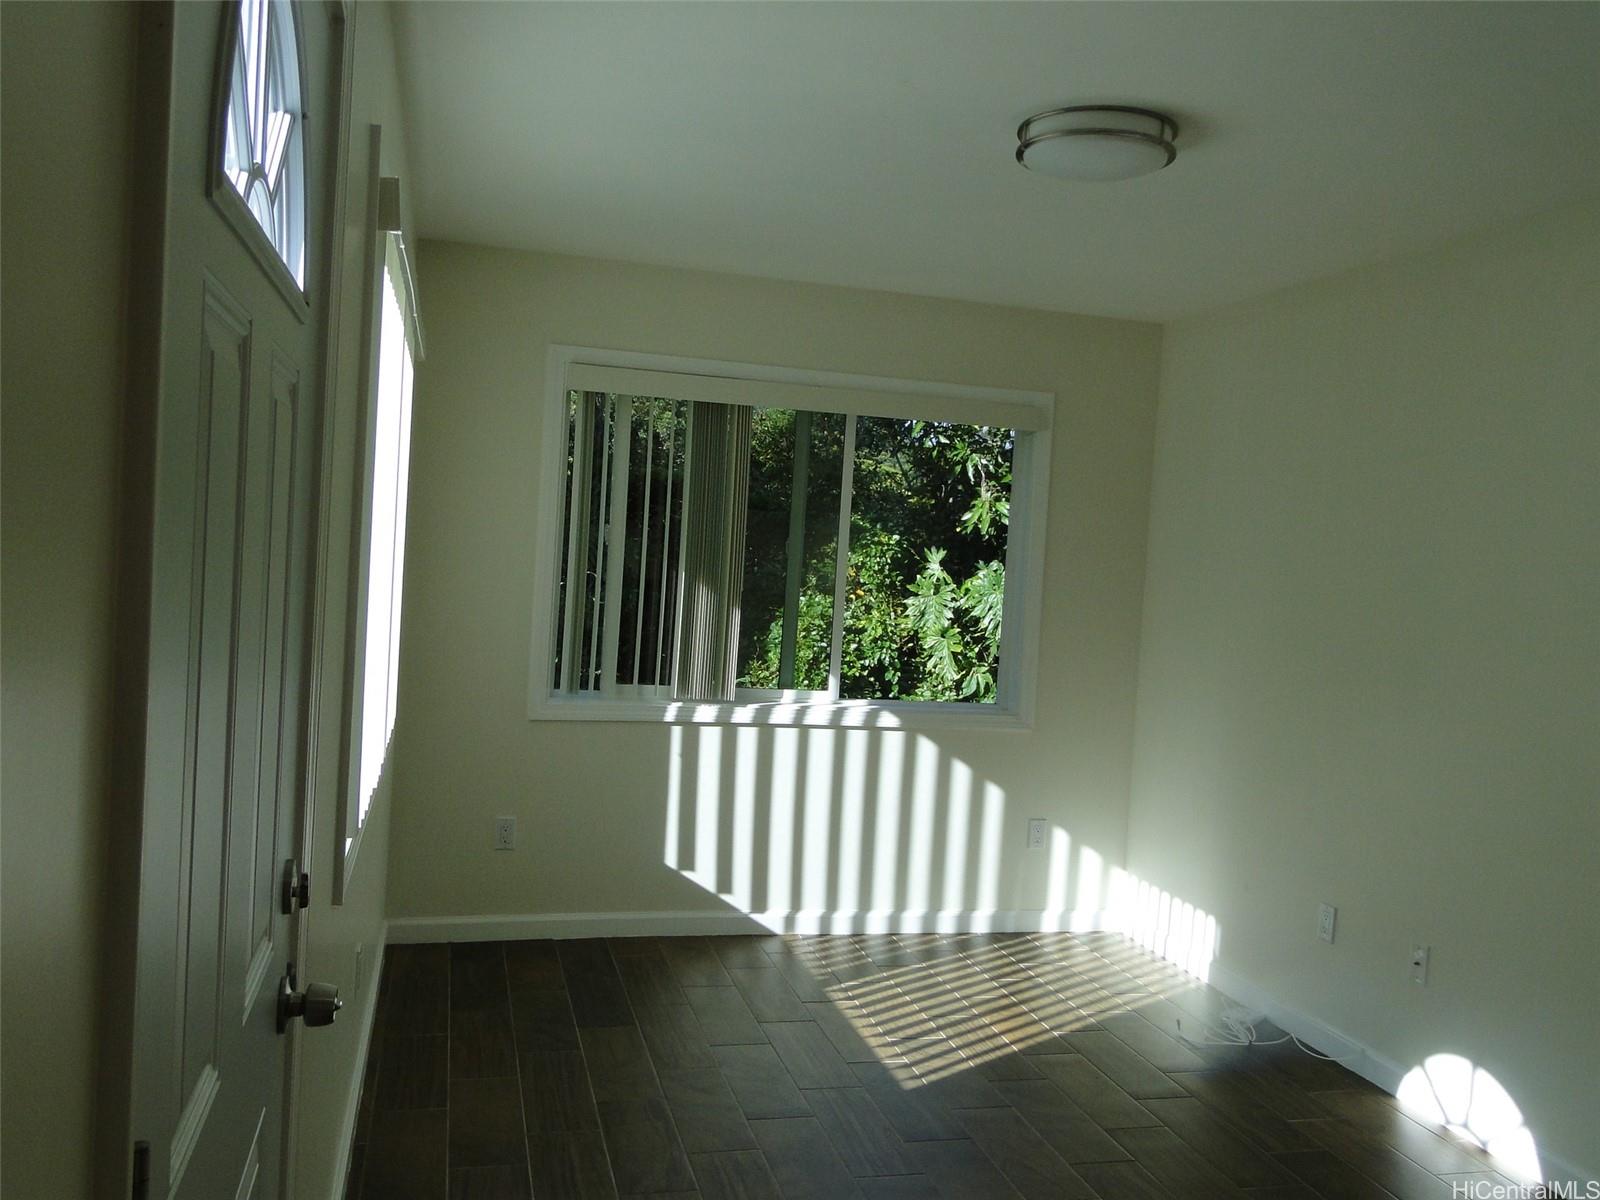 a view of porch with wooden floor